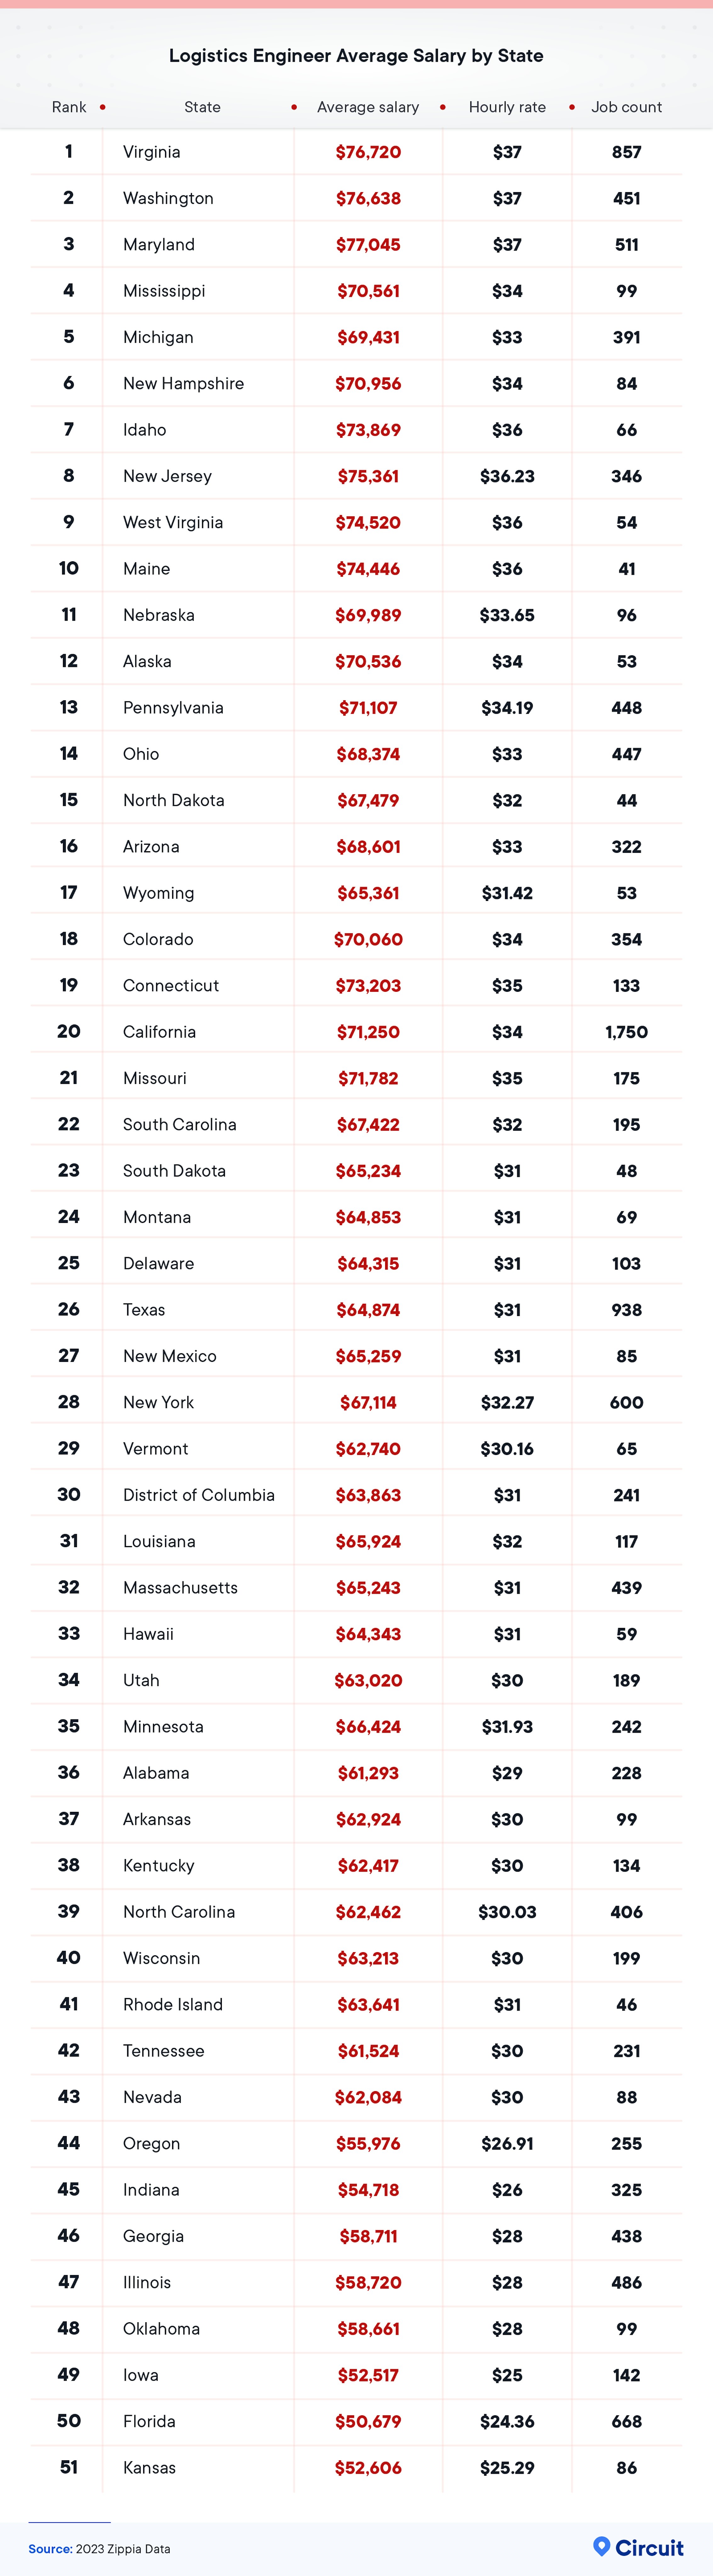 Logistics engineer average salary by state